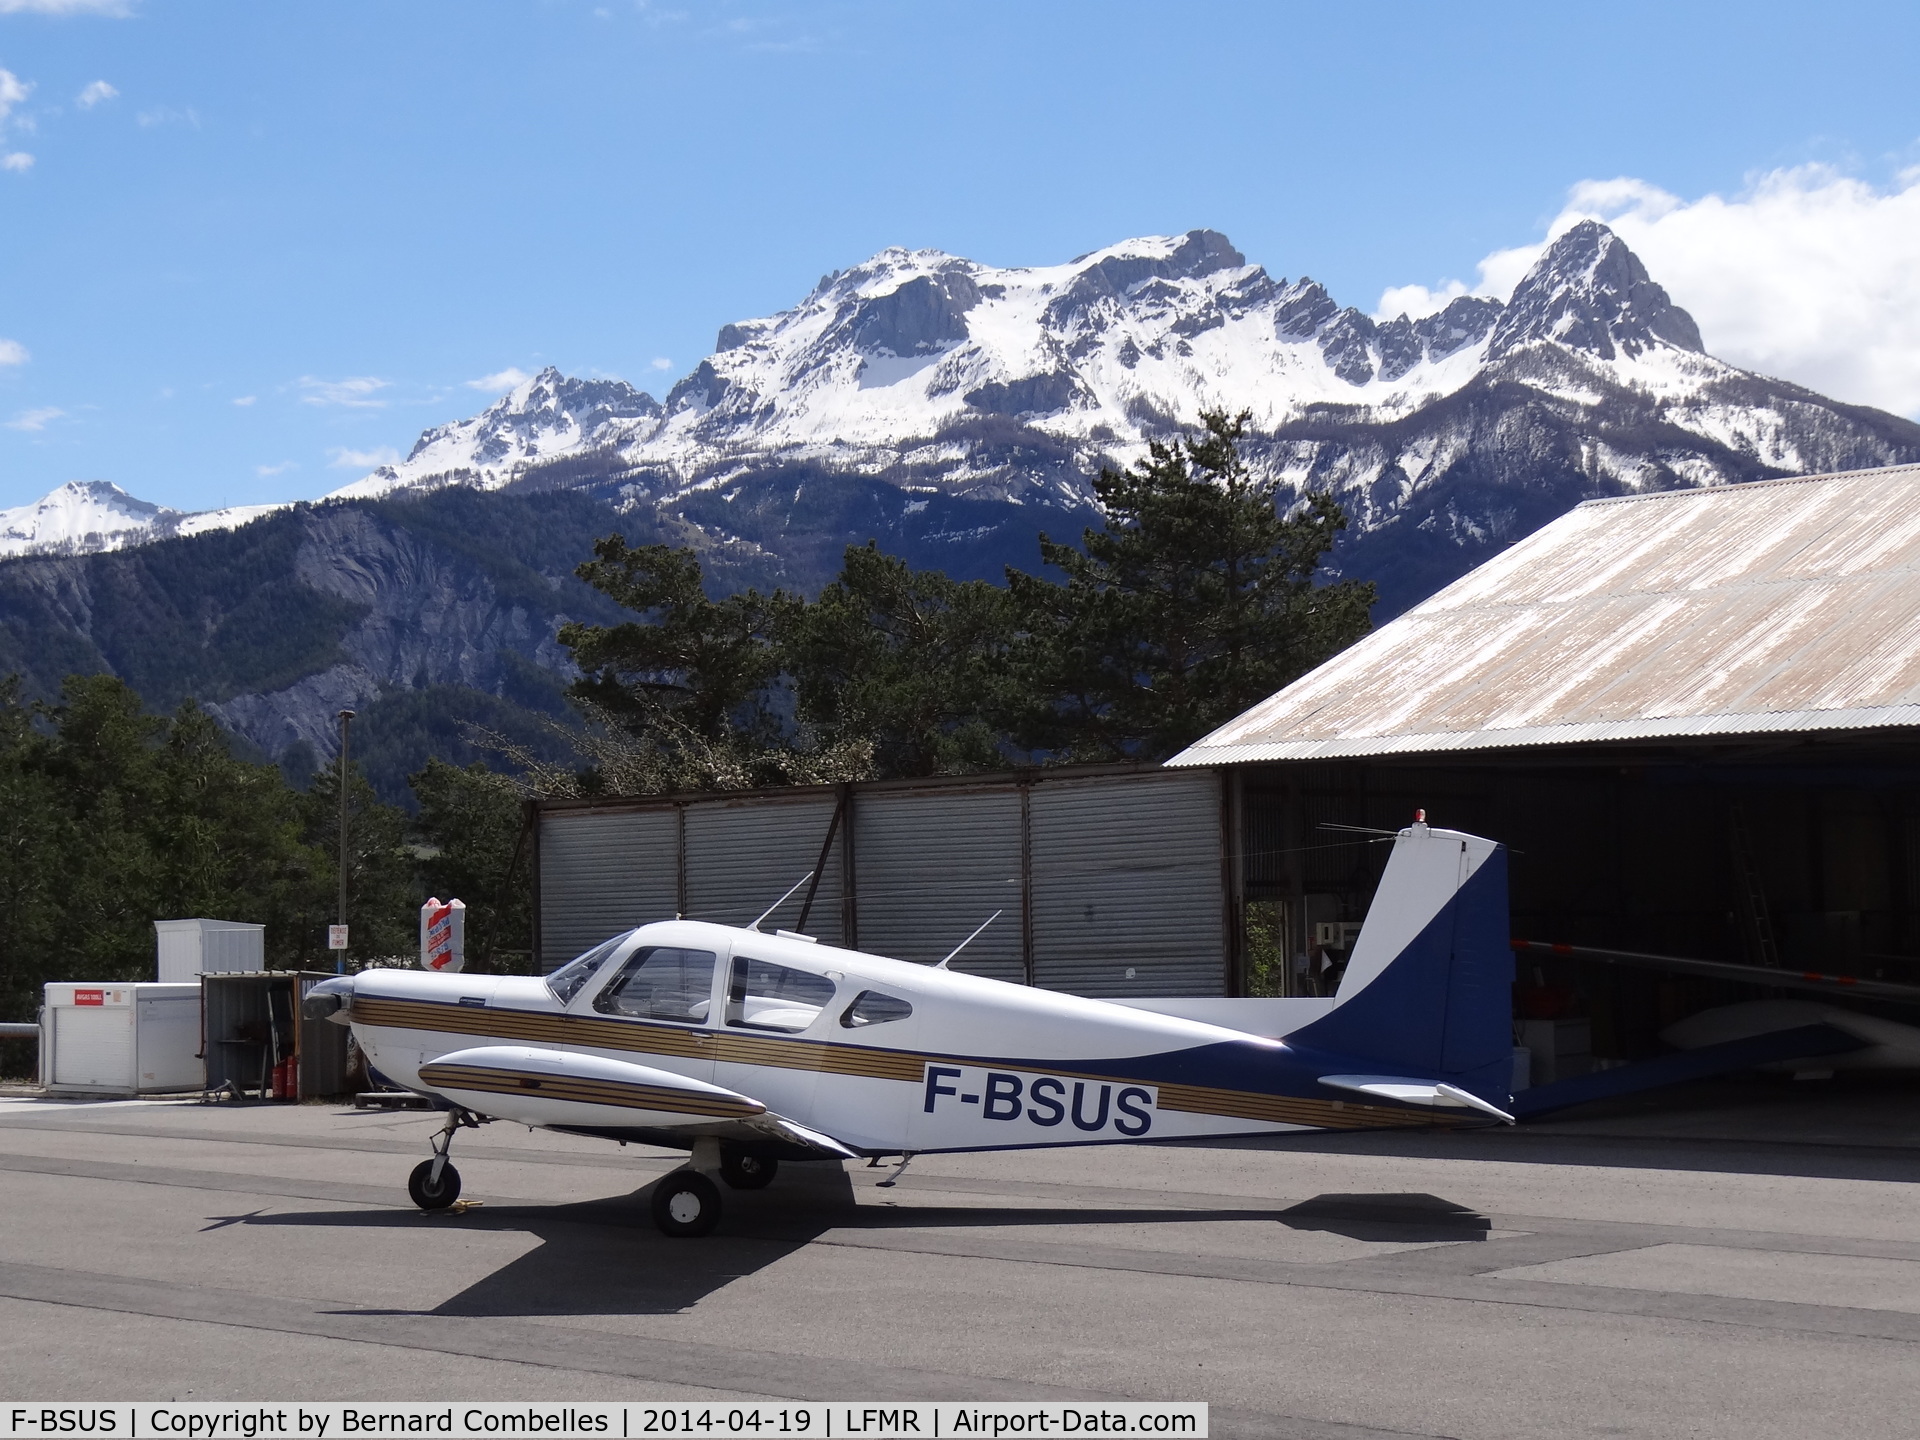 F-BSUS, 1972 SIAI-Marchetti S-208 C/N 2-20, Picture taken at Barcelonnette -LFMR- in April 2014